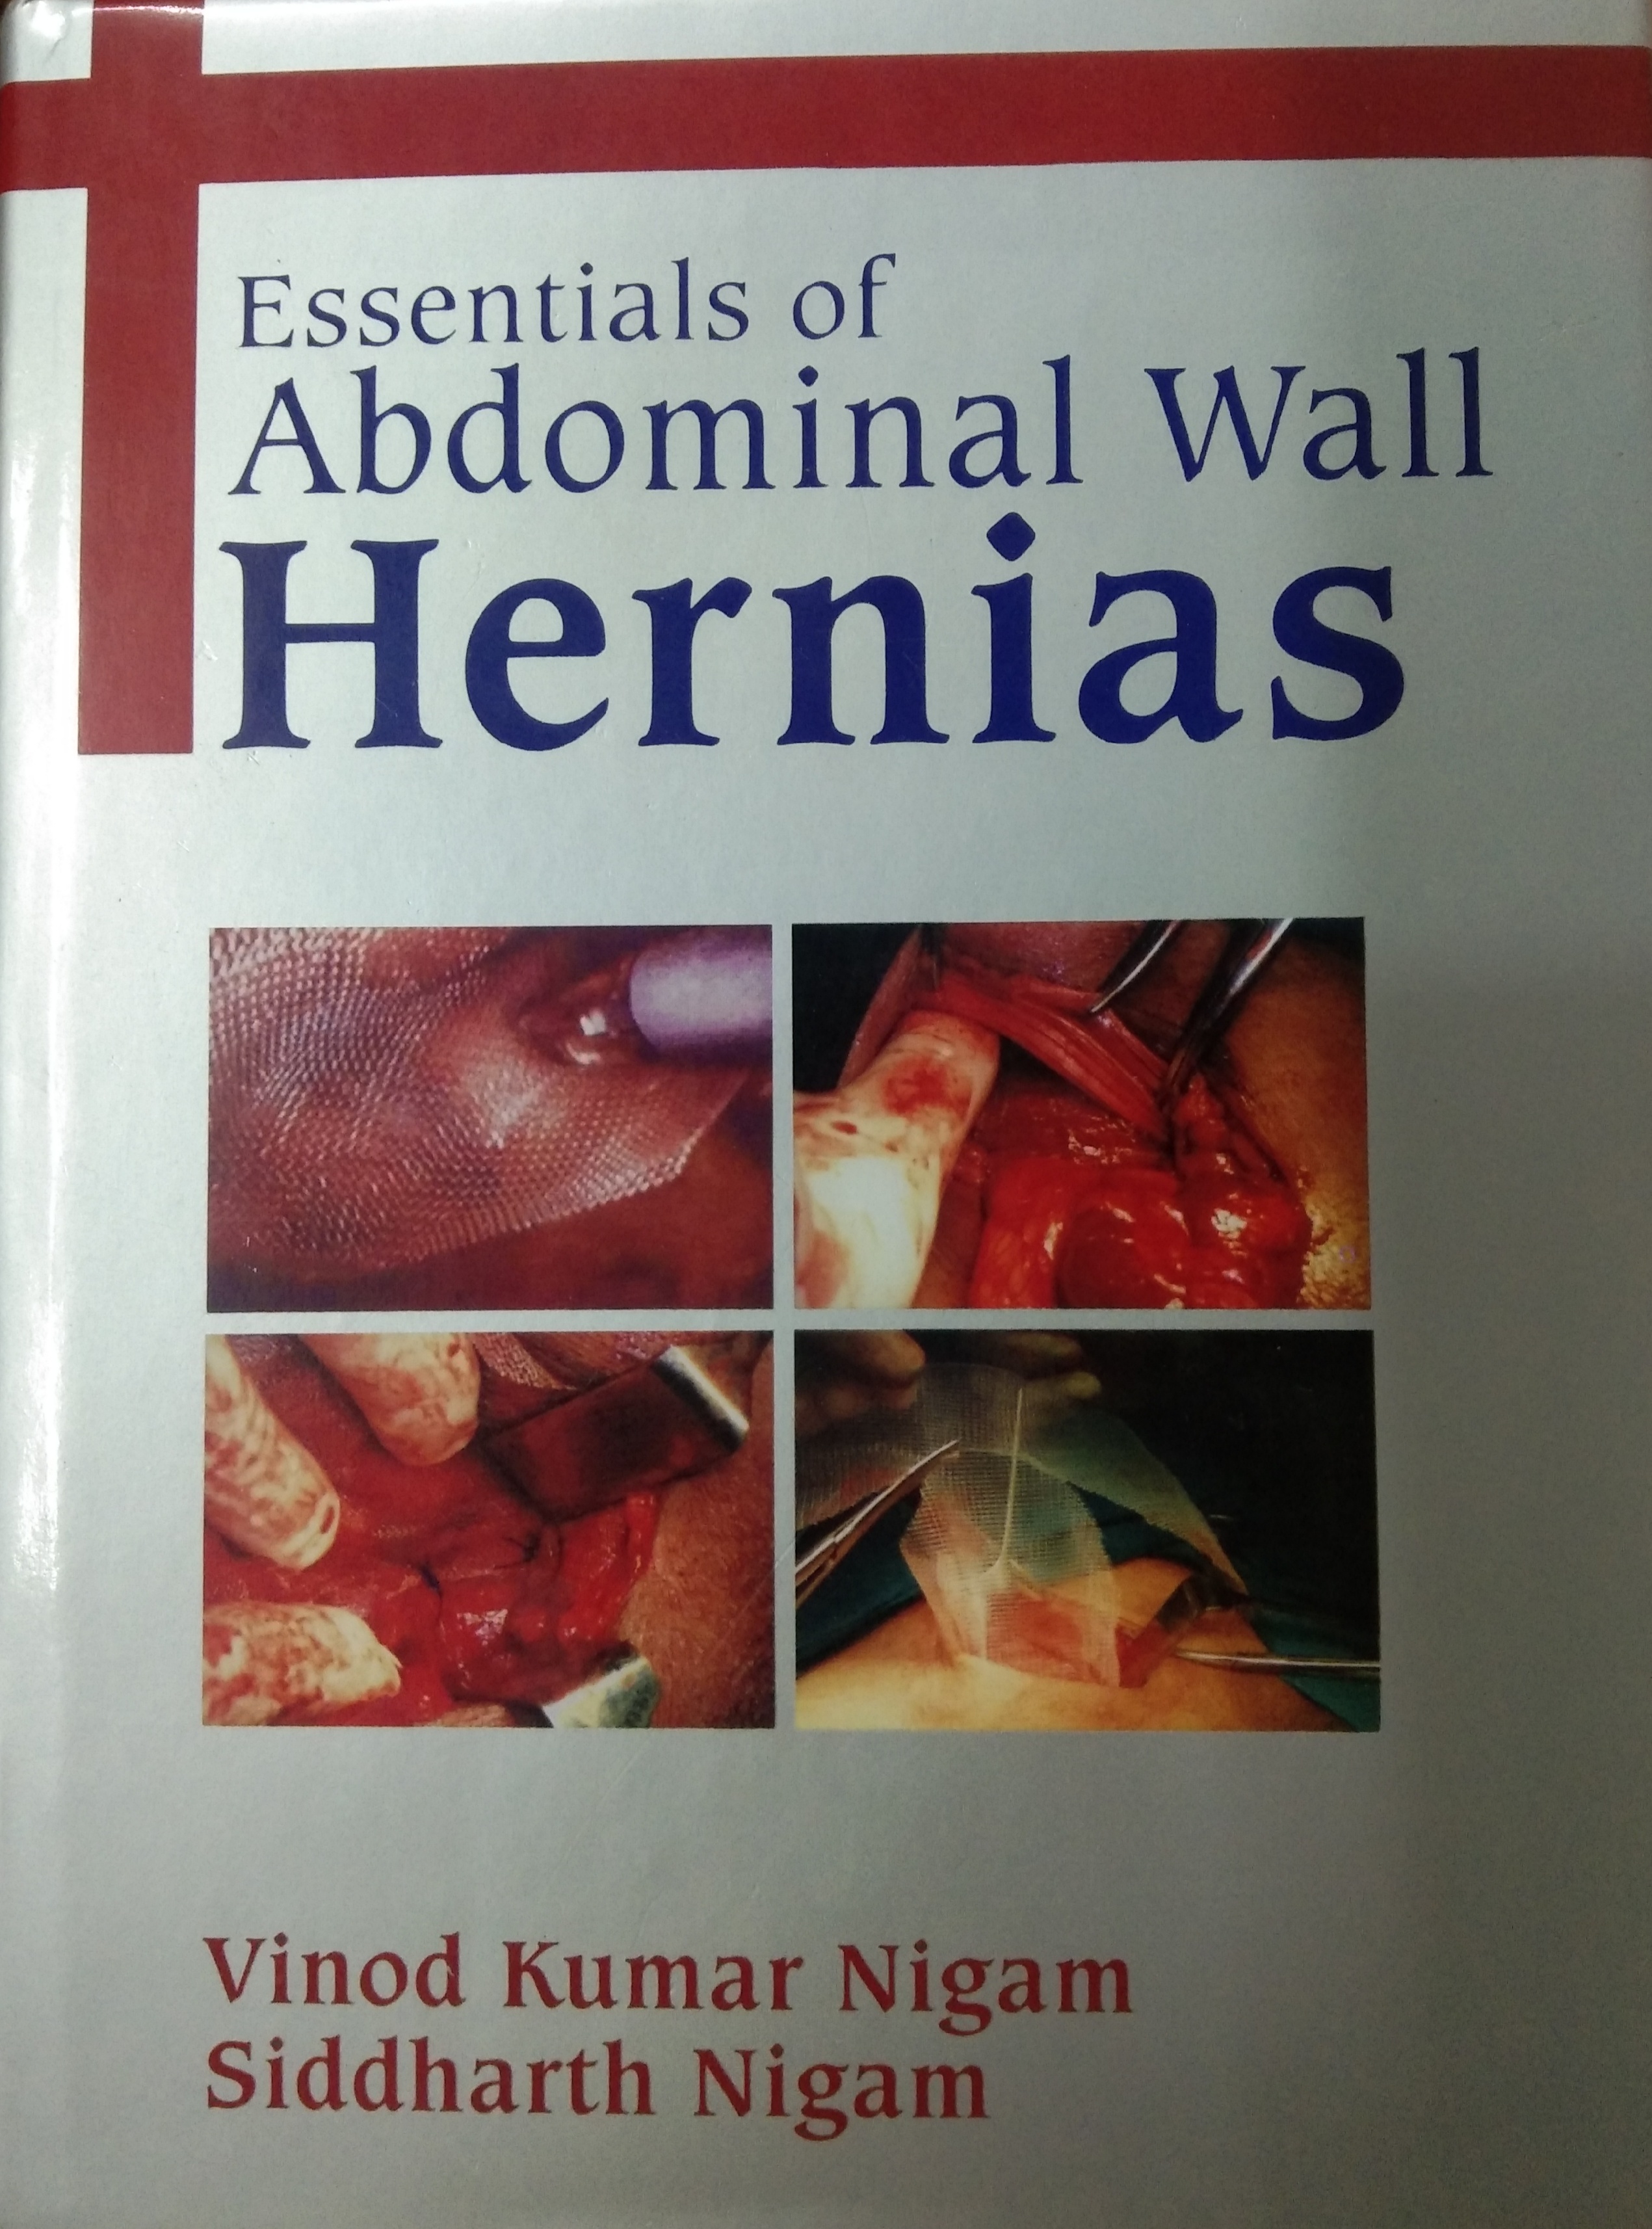 ESSENTIALS OF ABDOMINAL WALL HERNIAS WITH CD-ROM